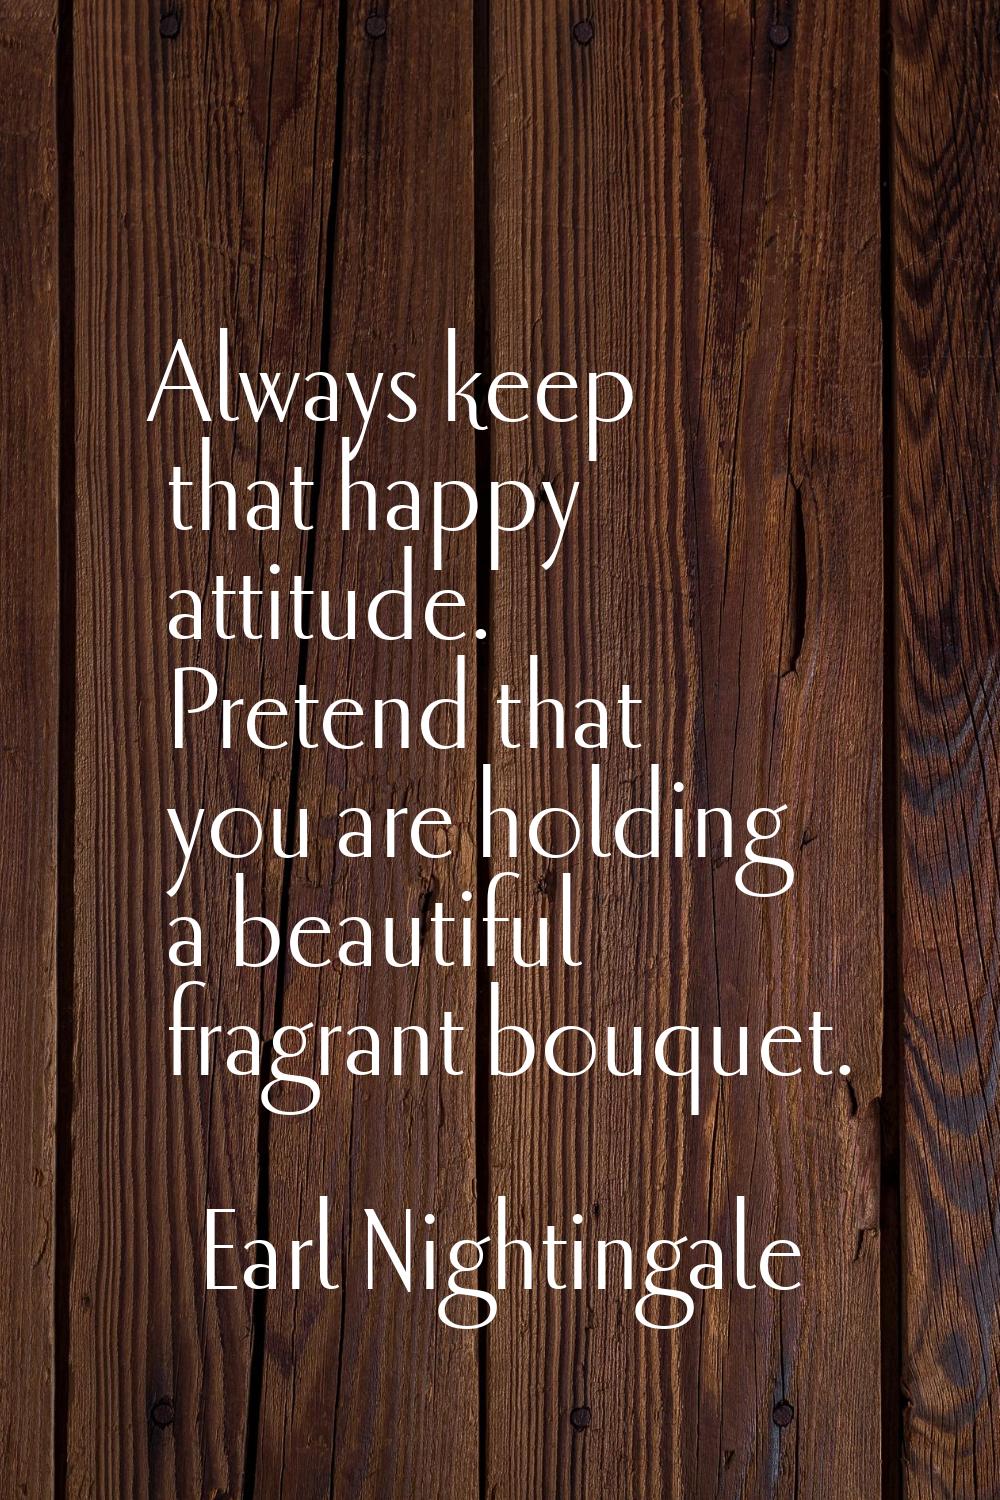 Always keep that happy attitude. Pretend that you are holding a beautiful fragrant bouquet.